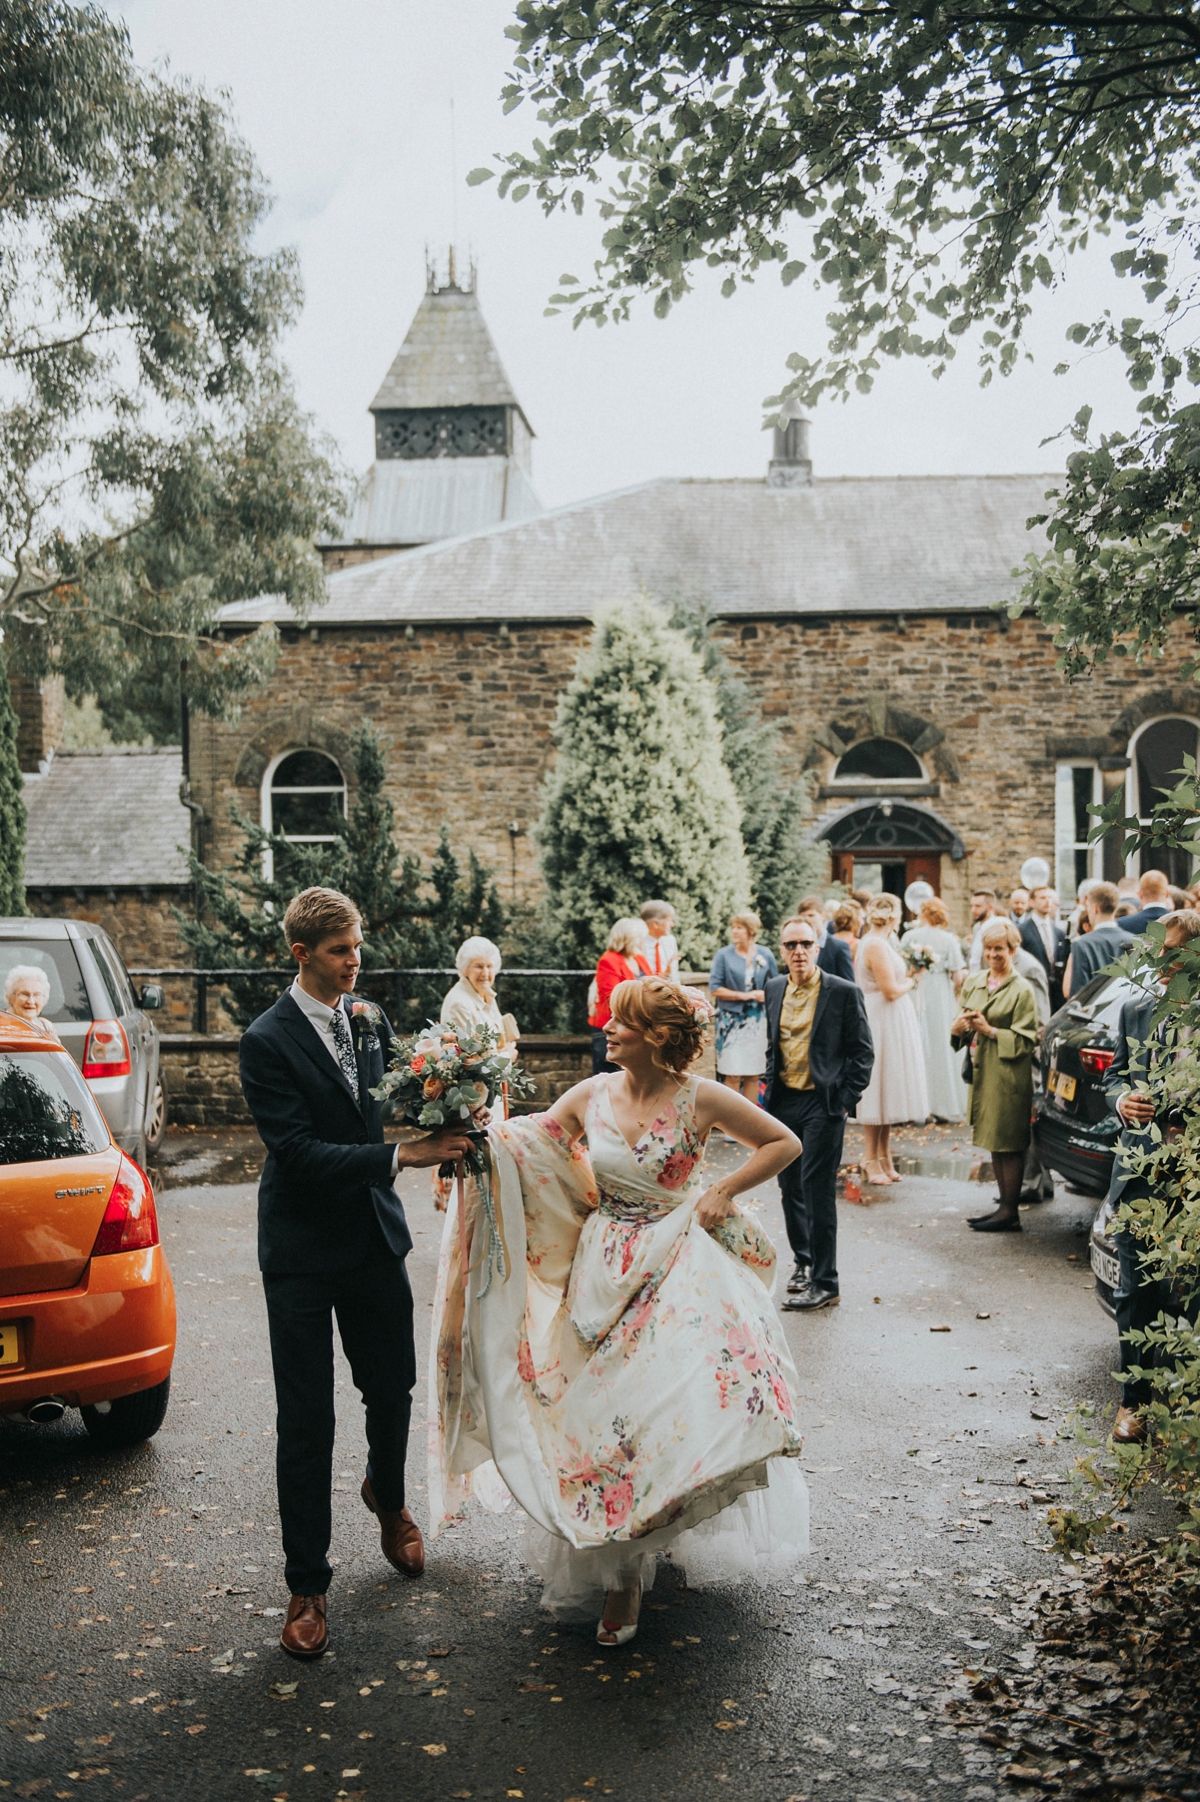 19 Floral wedding dress by Charlotte Balbier